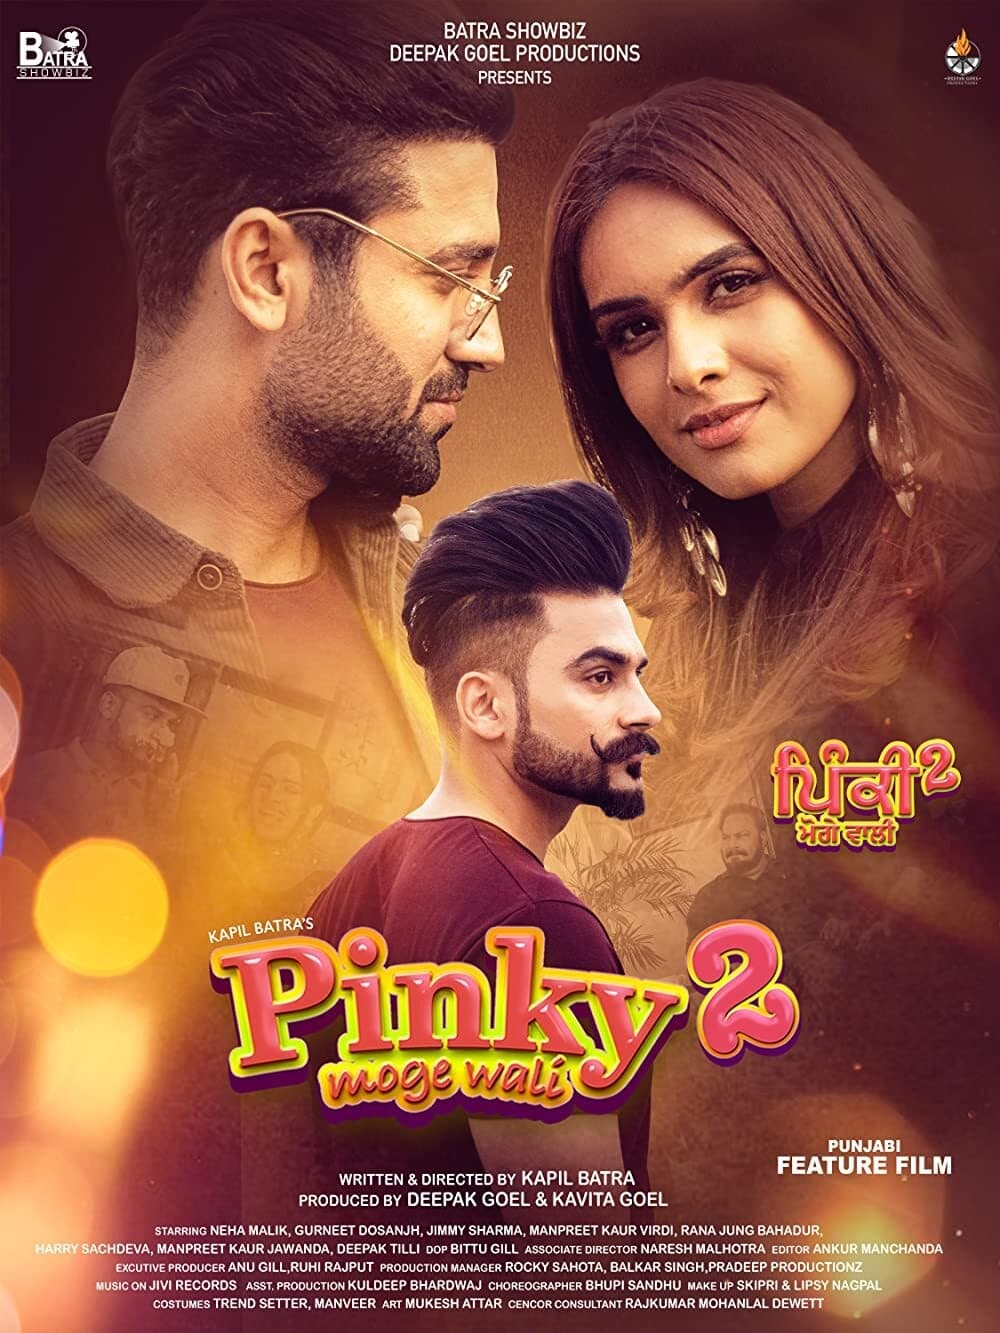 Poster for the movie "Pinky Moge Wali 2"